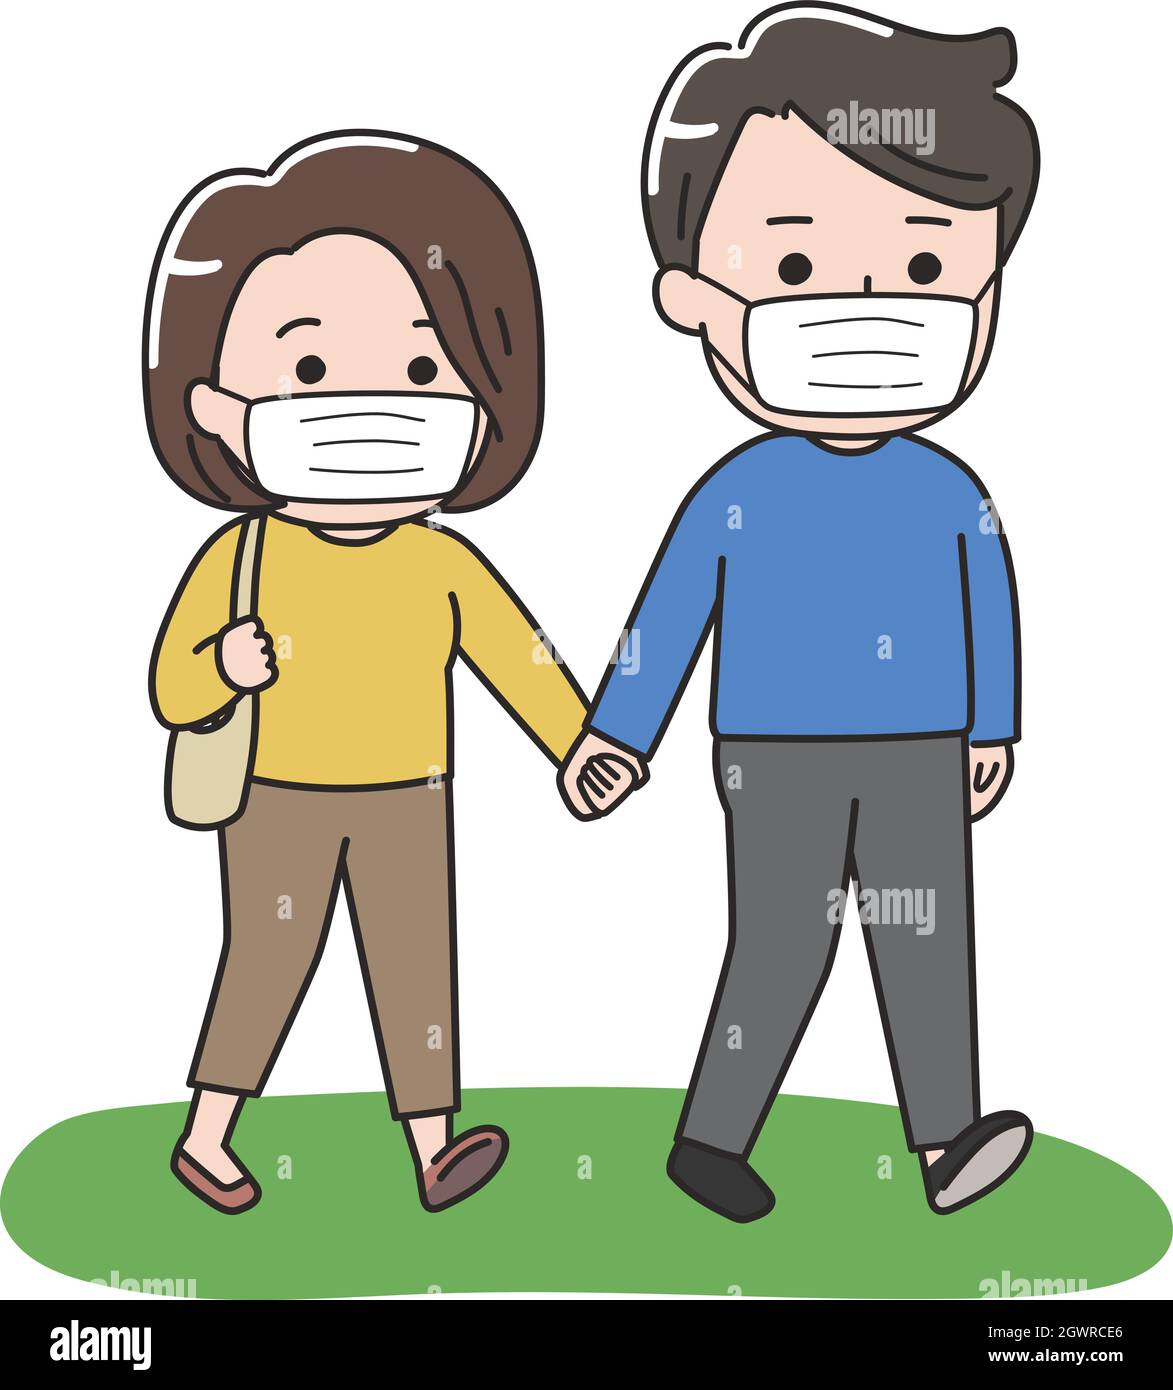 The couple goes traveling hand in hand. Vector illustration on a white background. Stock Vector